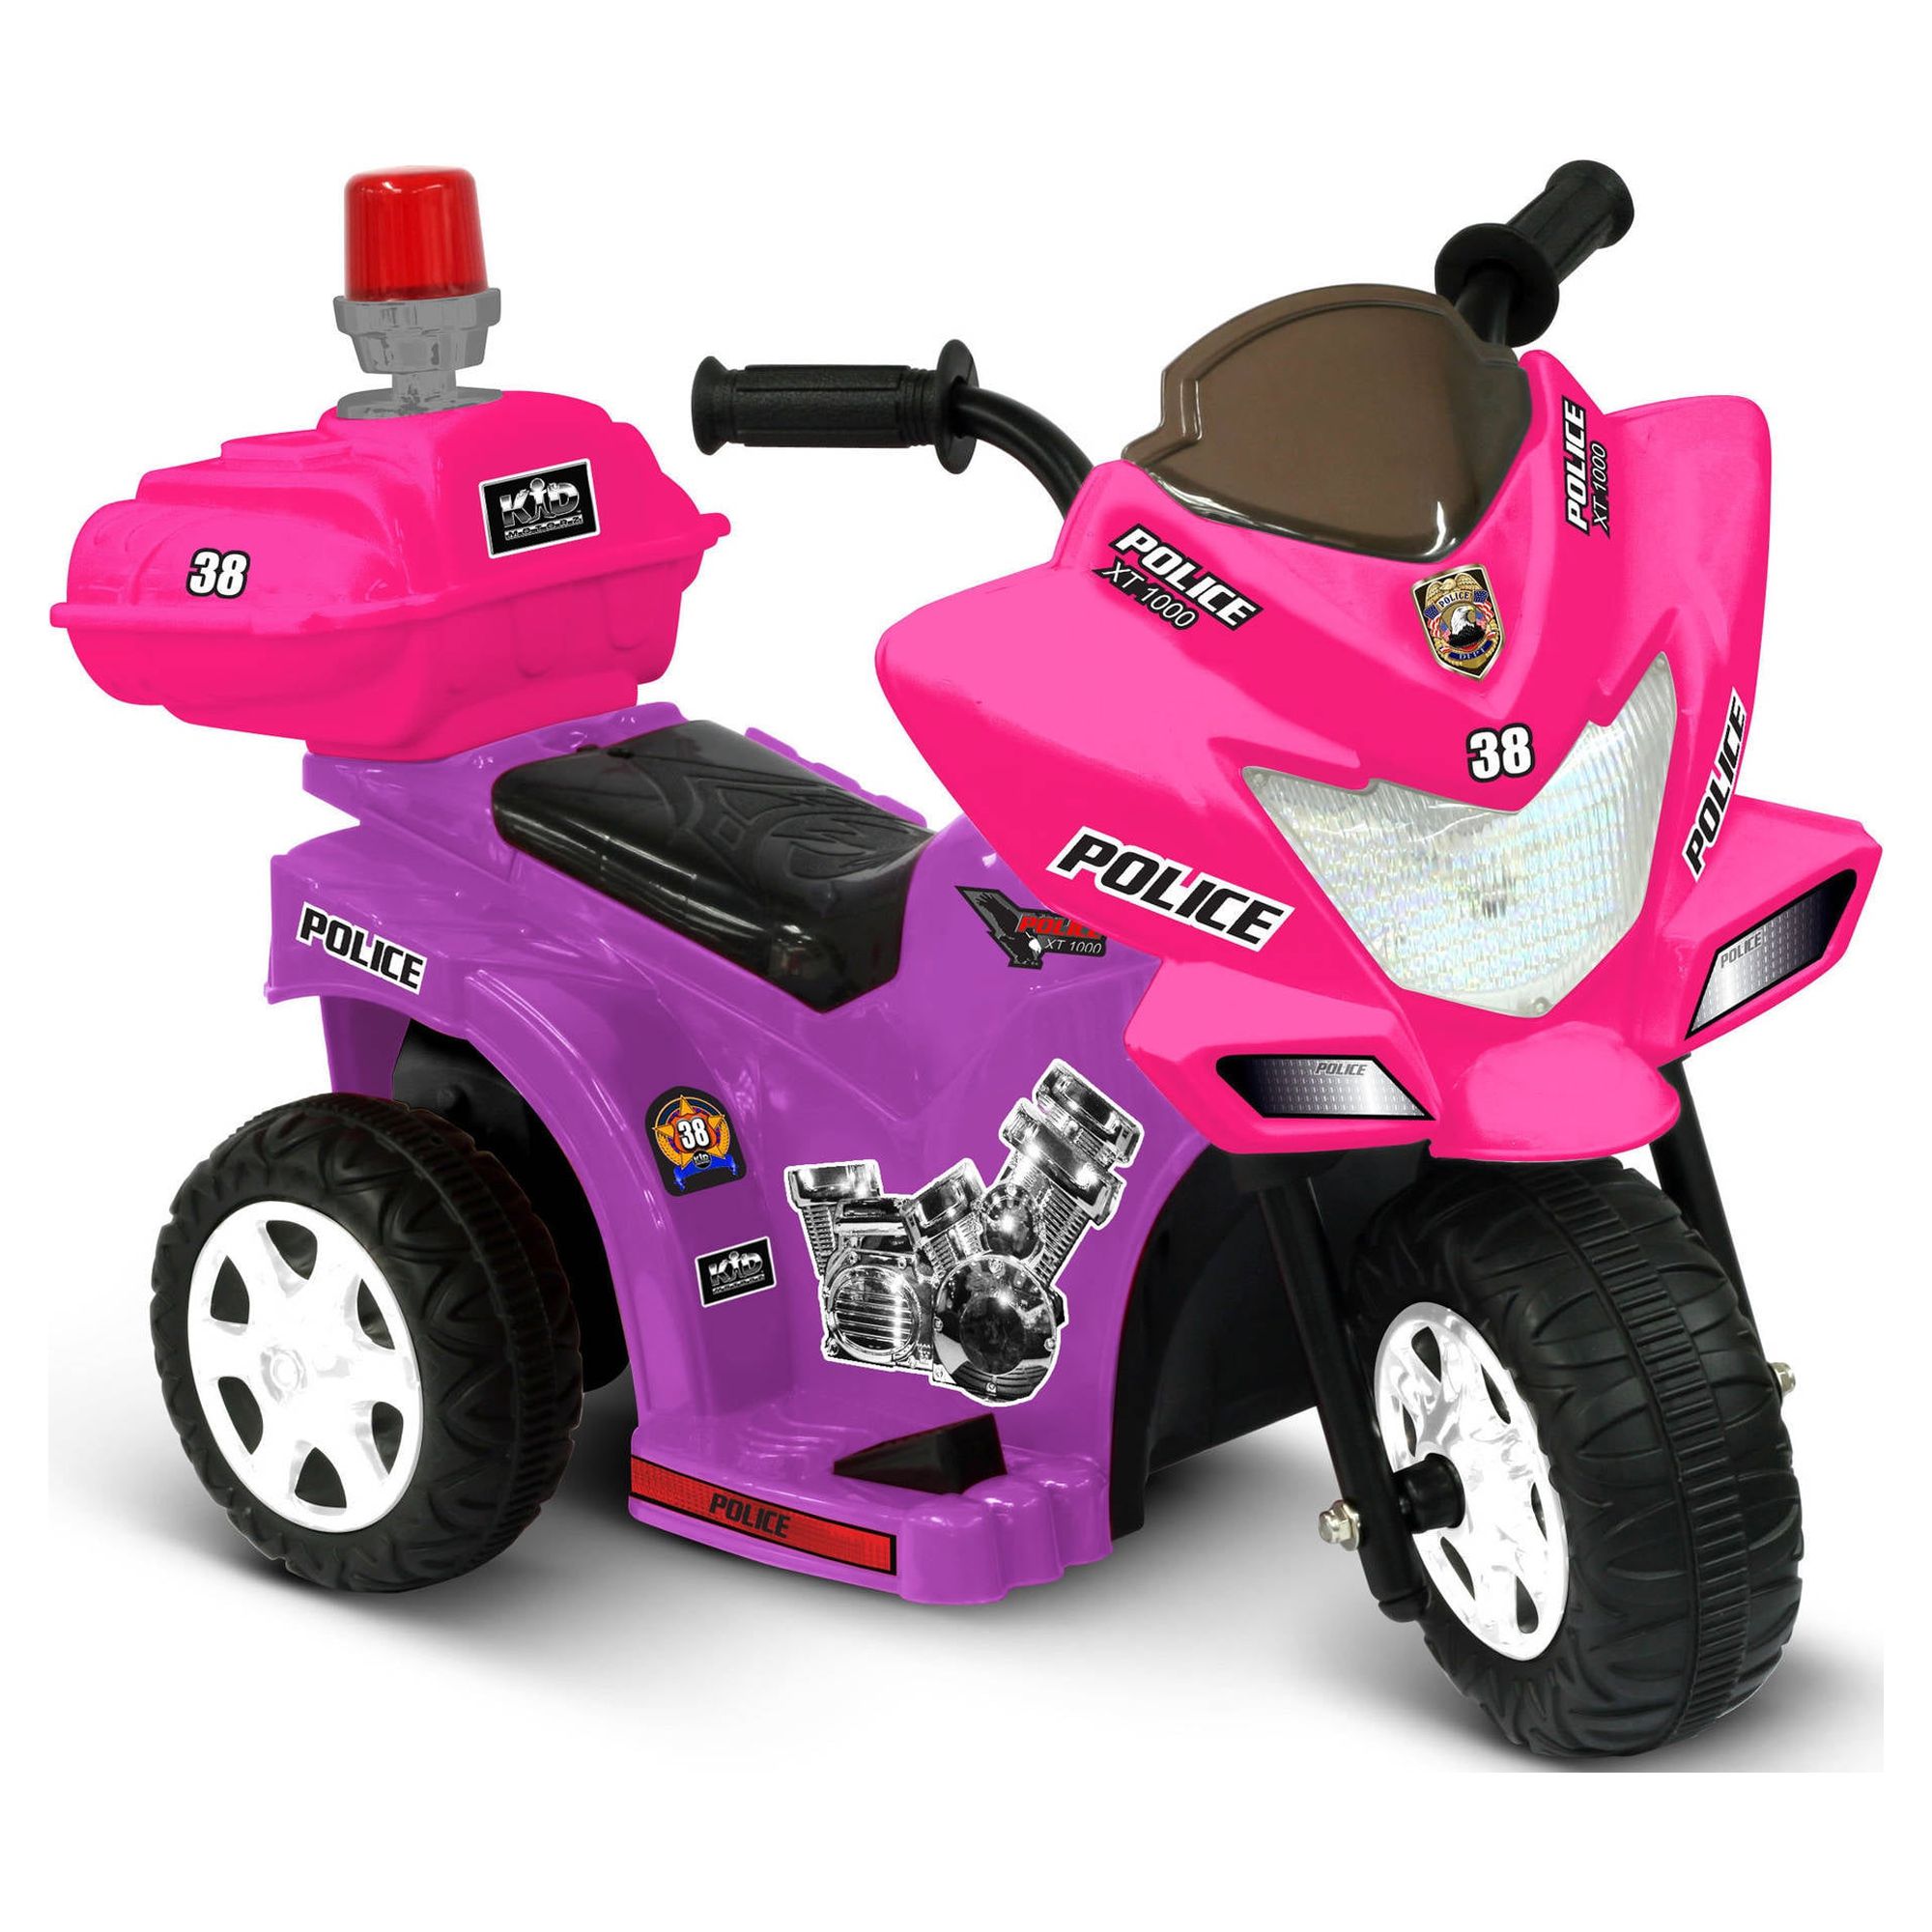 Kid Motorz 6 V Lil' Patrol Purple Battery Powered Ride-On Toy - image 1 of 4